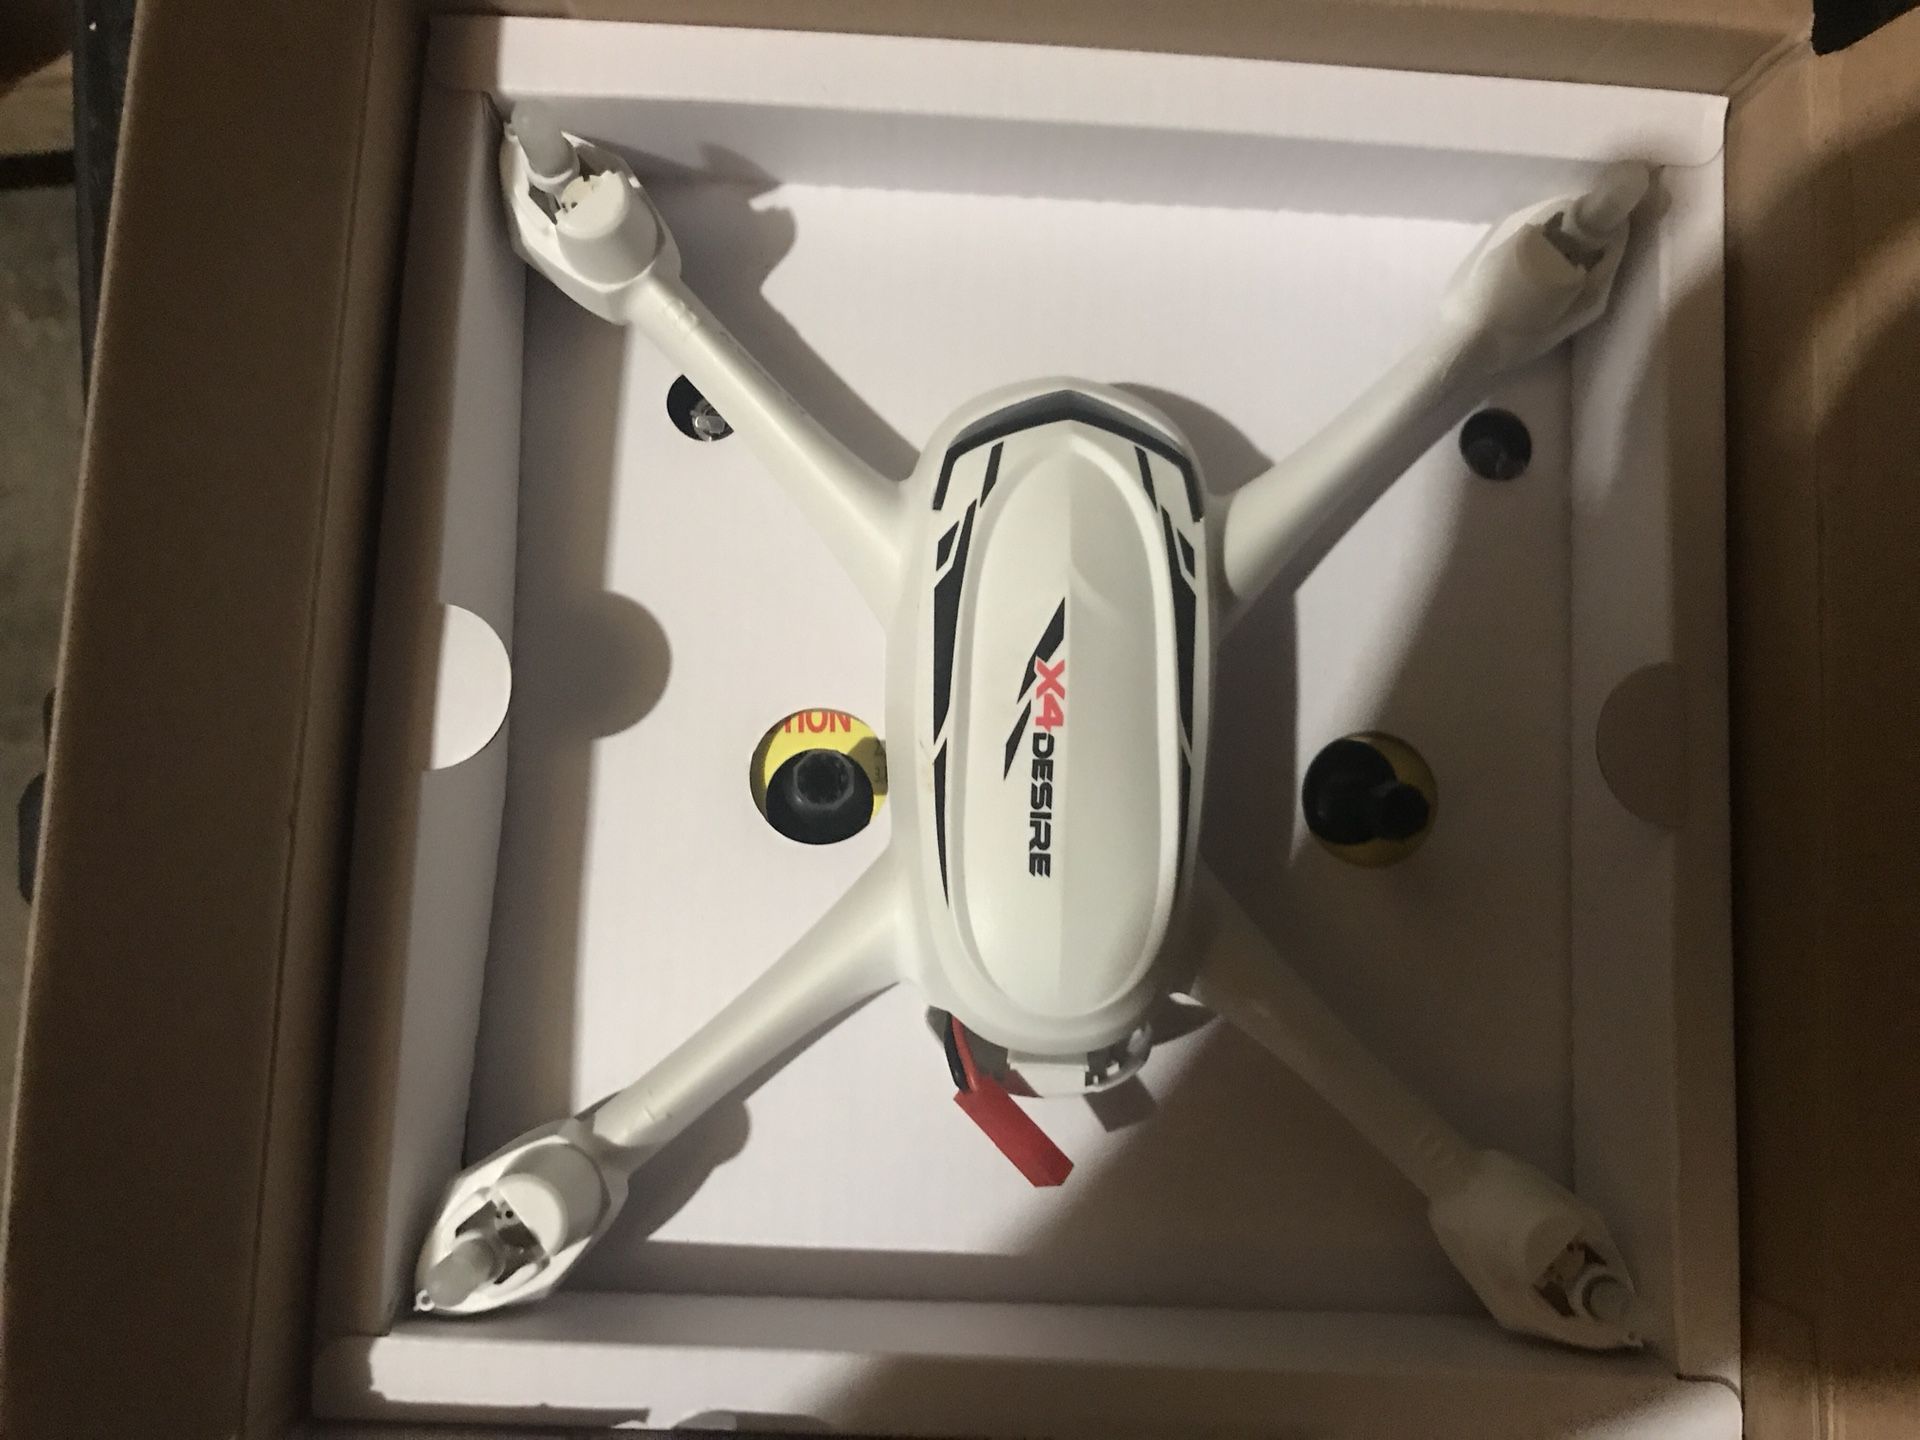 Hubsan h502s toy drone